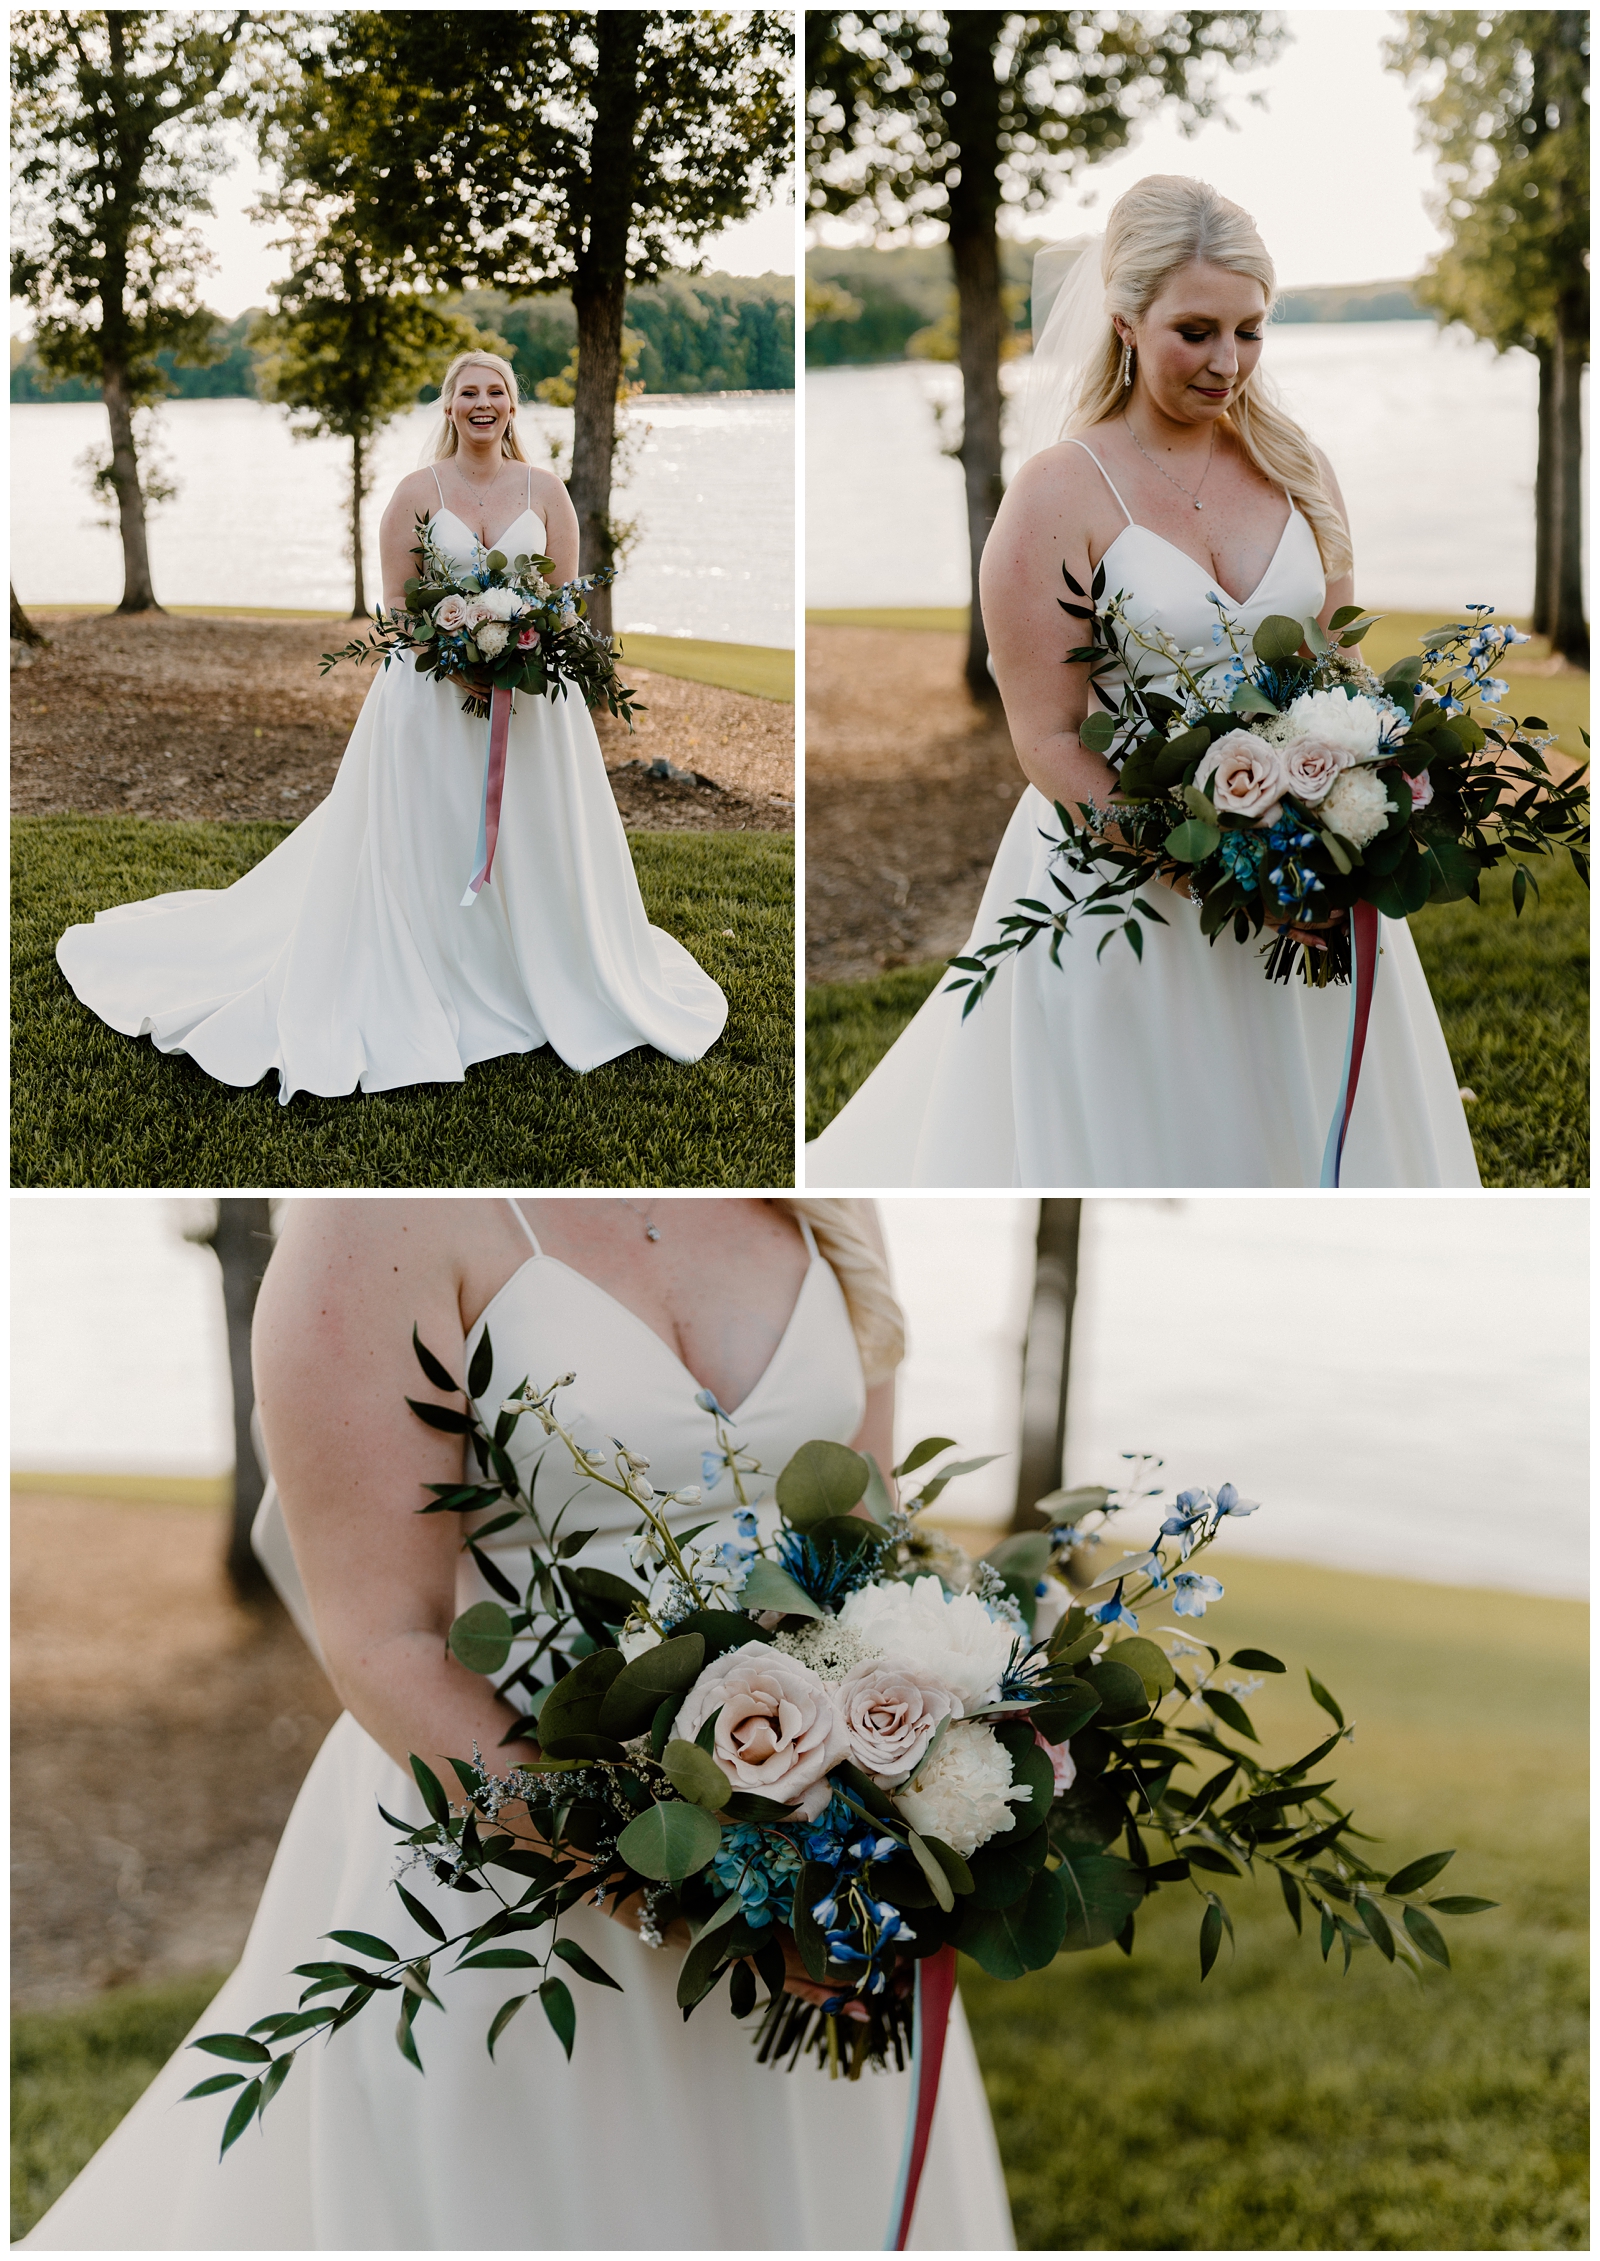 Southern bride's wedding day portraits at Belew's Lake lakefront venue in North Carolina - by NC photographer